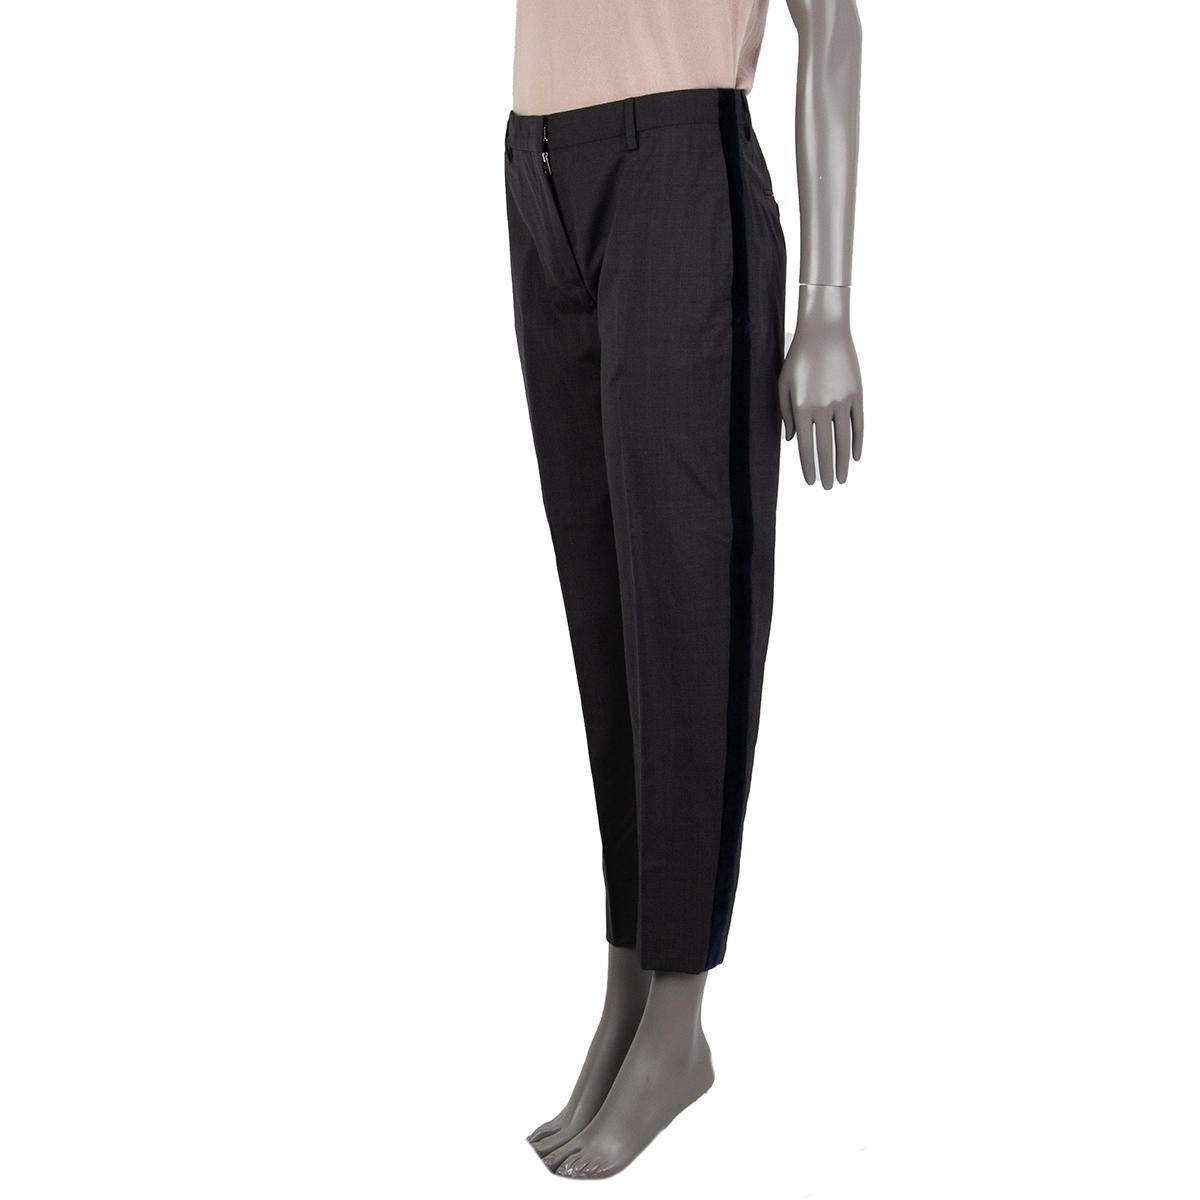 100% authentic Prada cropped pants in charcoal and midnight blue virgin wool (100%) with a velvet panelle on both sides, belt loops, slit-pockets in the frontand back. Unlined. Closes with a zipper, hoo and bar in the front. Has been worn and is in